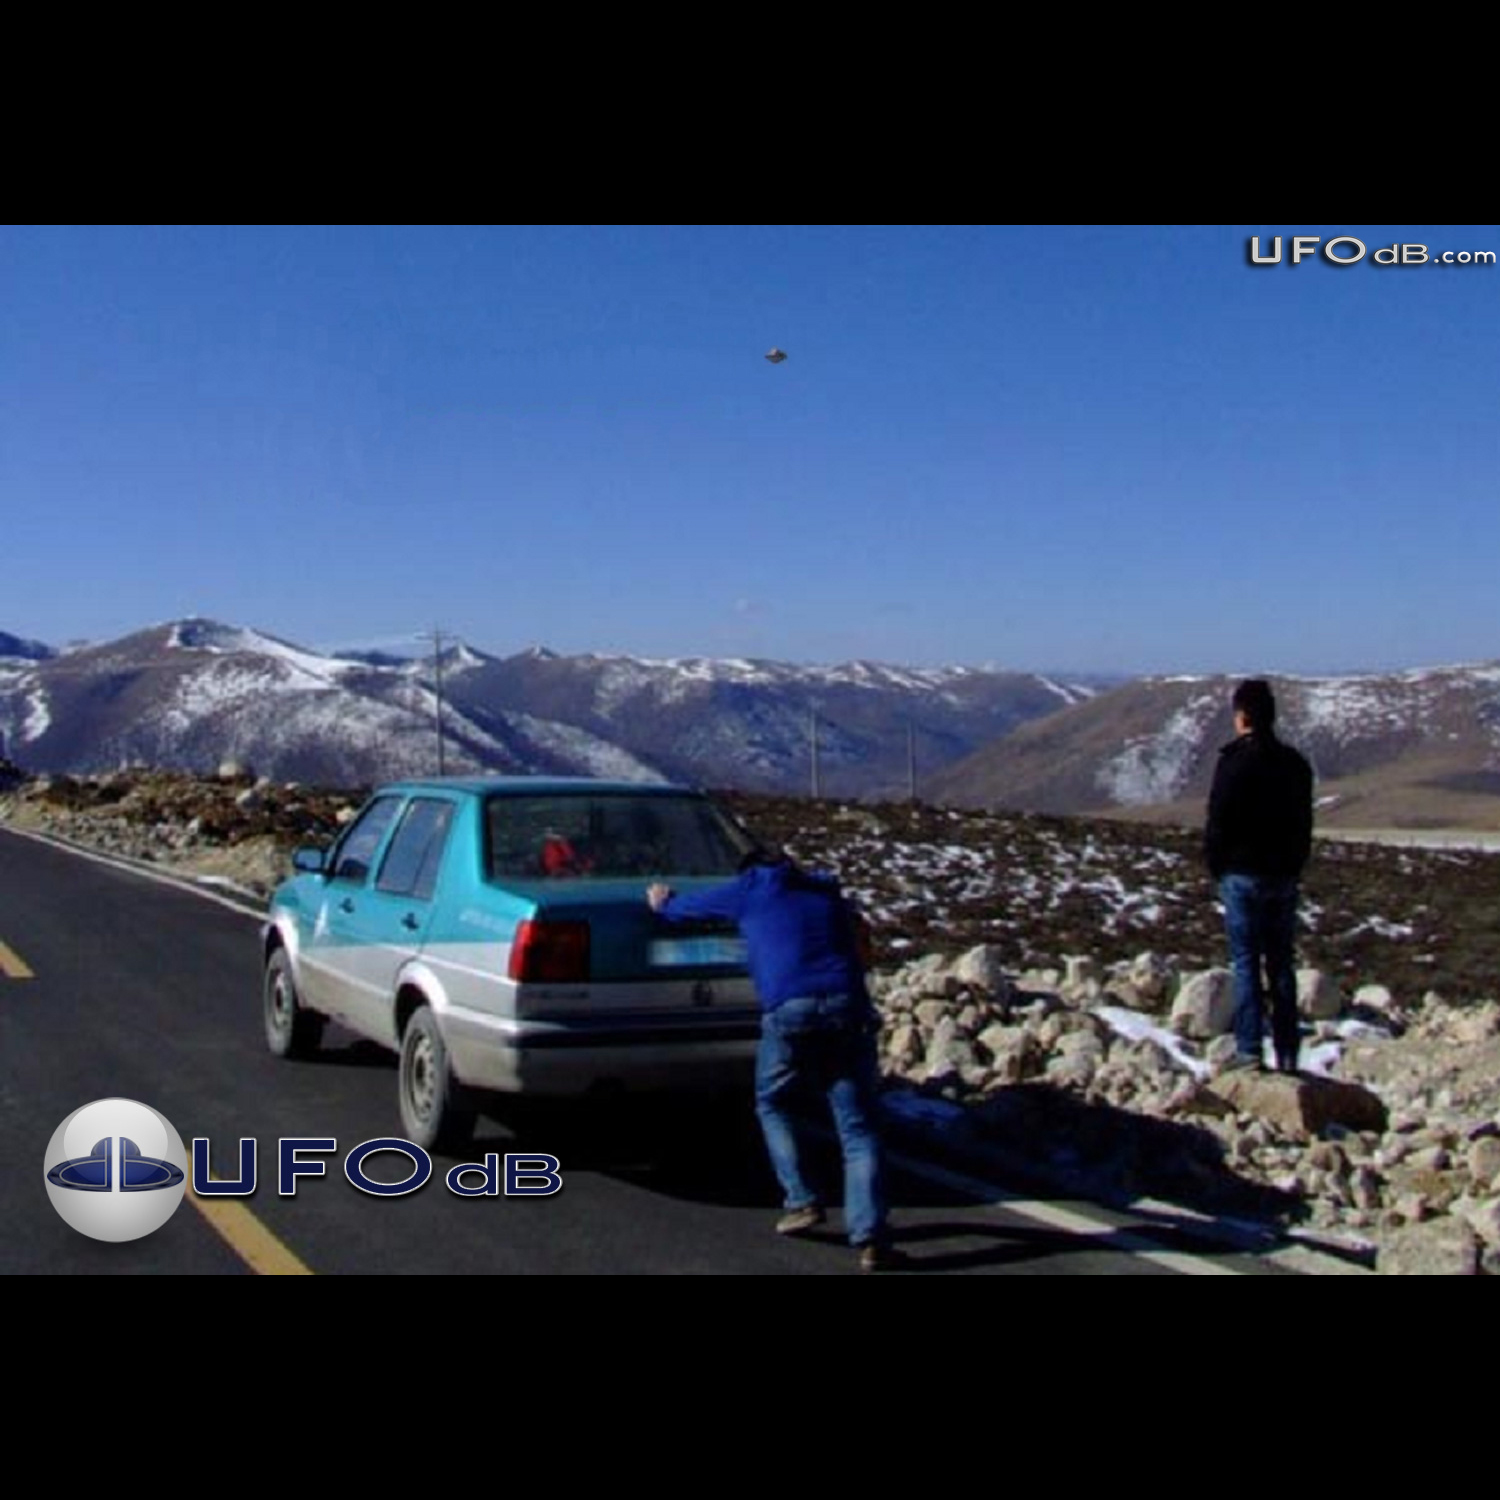 A UFO is photograph in the Icy mountains of Tibet, China February 2011 UFO Picture #251-1